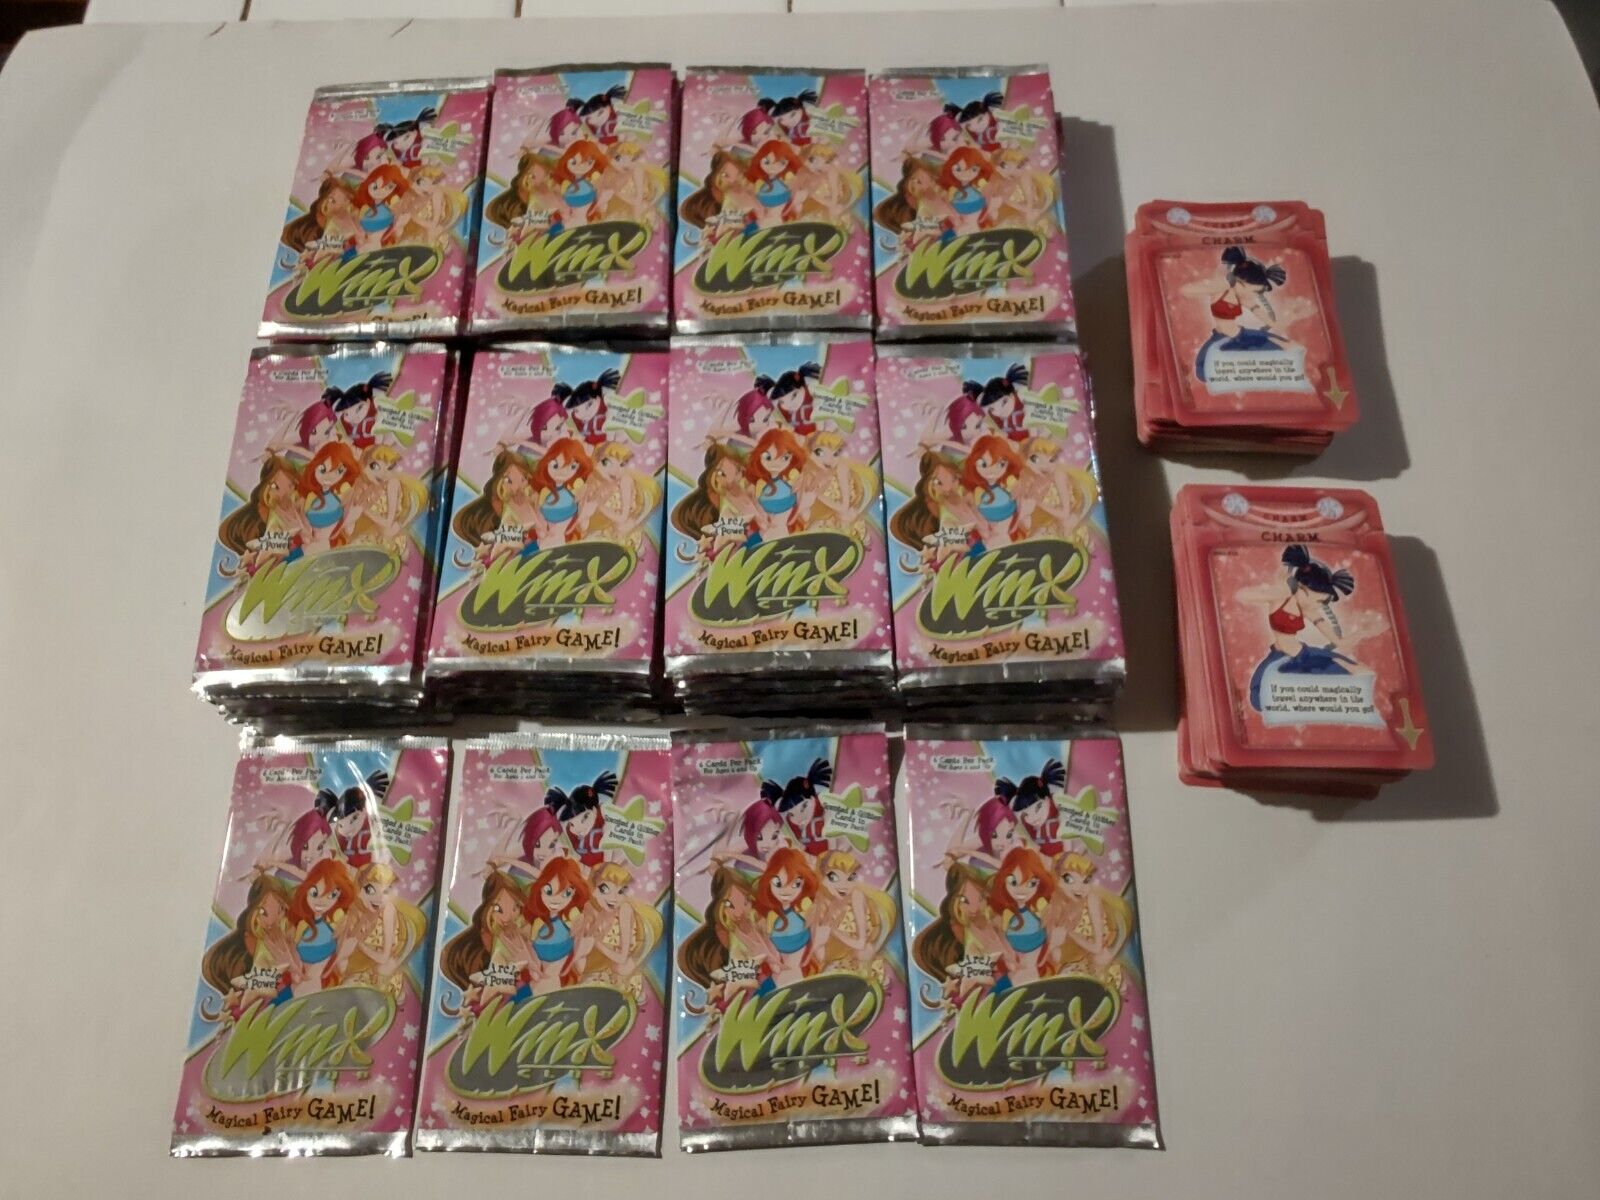 RARE LOT of 10 PACKS of 2005 WINX CLUB GAME CARDS SEALED PACKS of 6 + 10 LOOSE